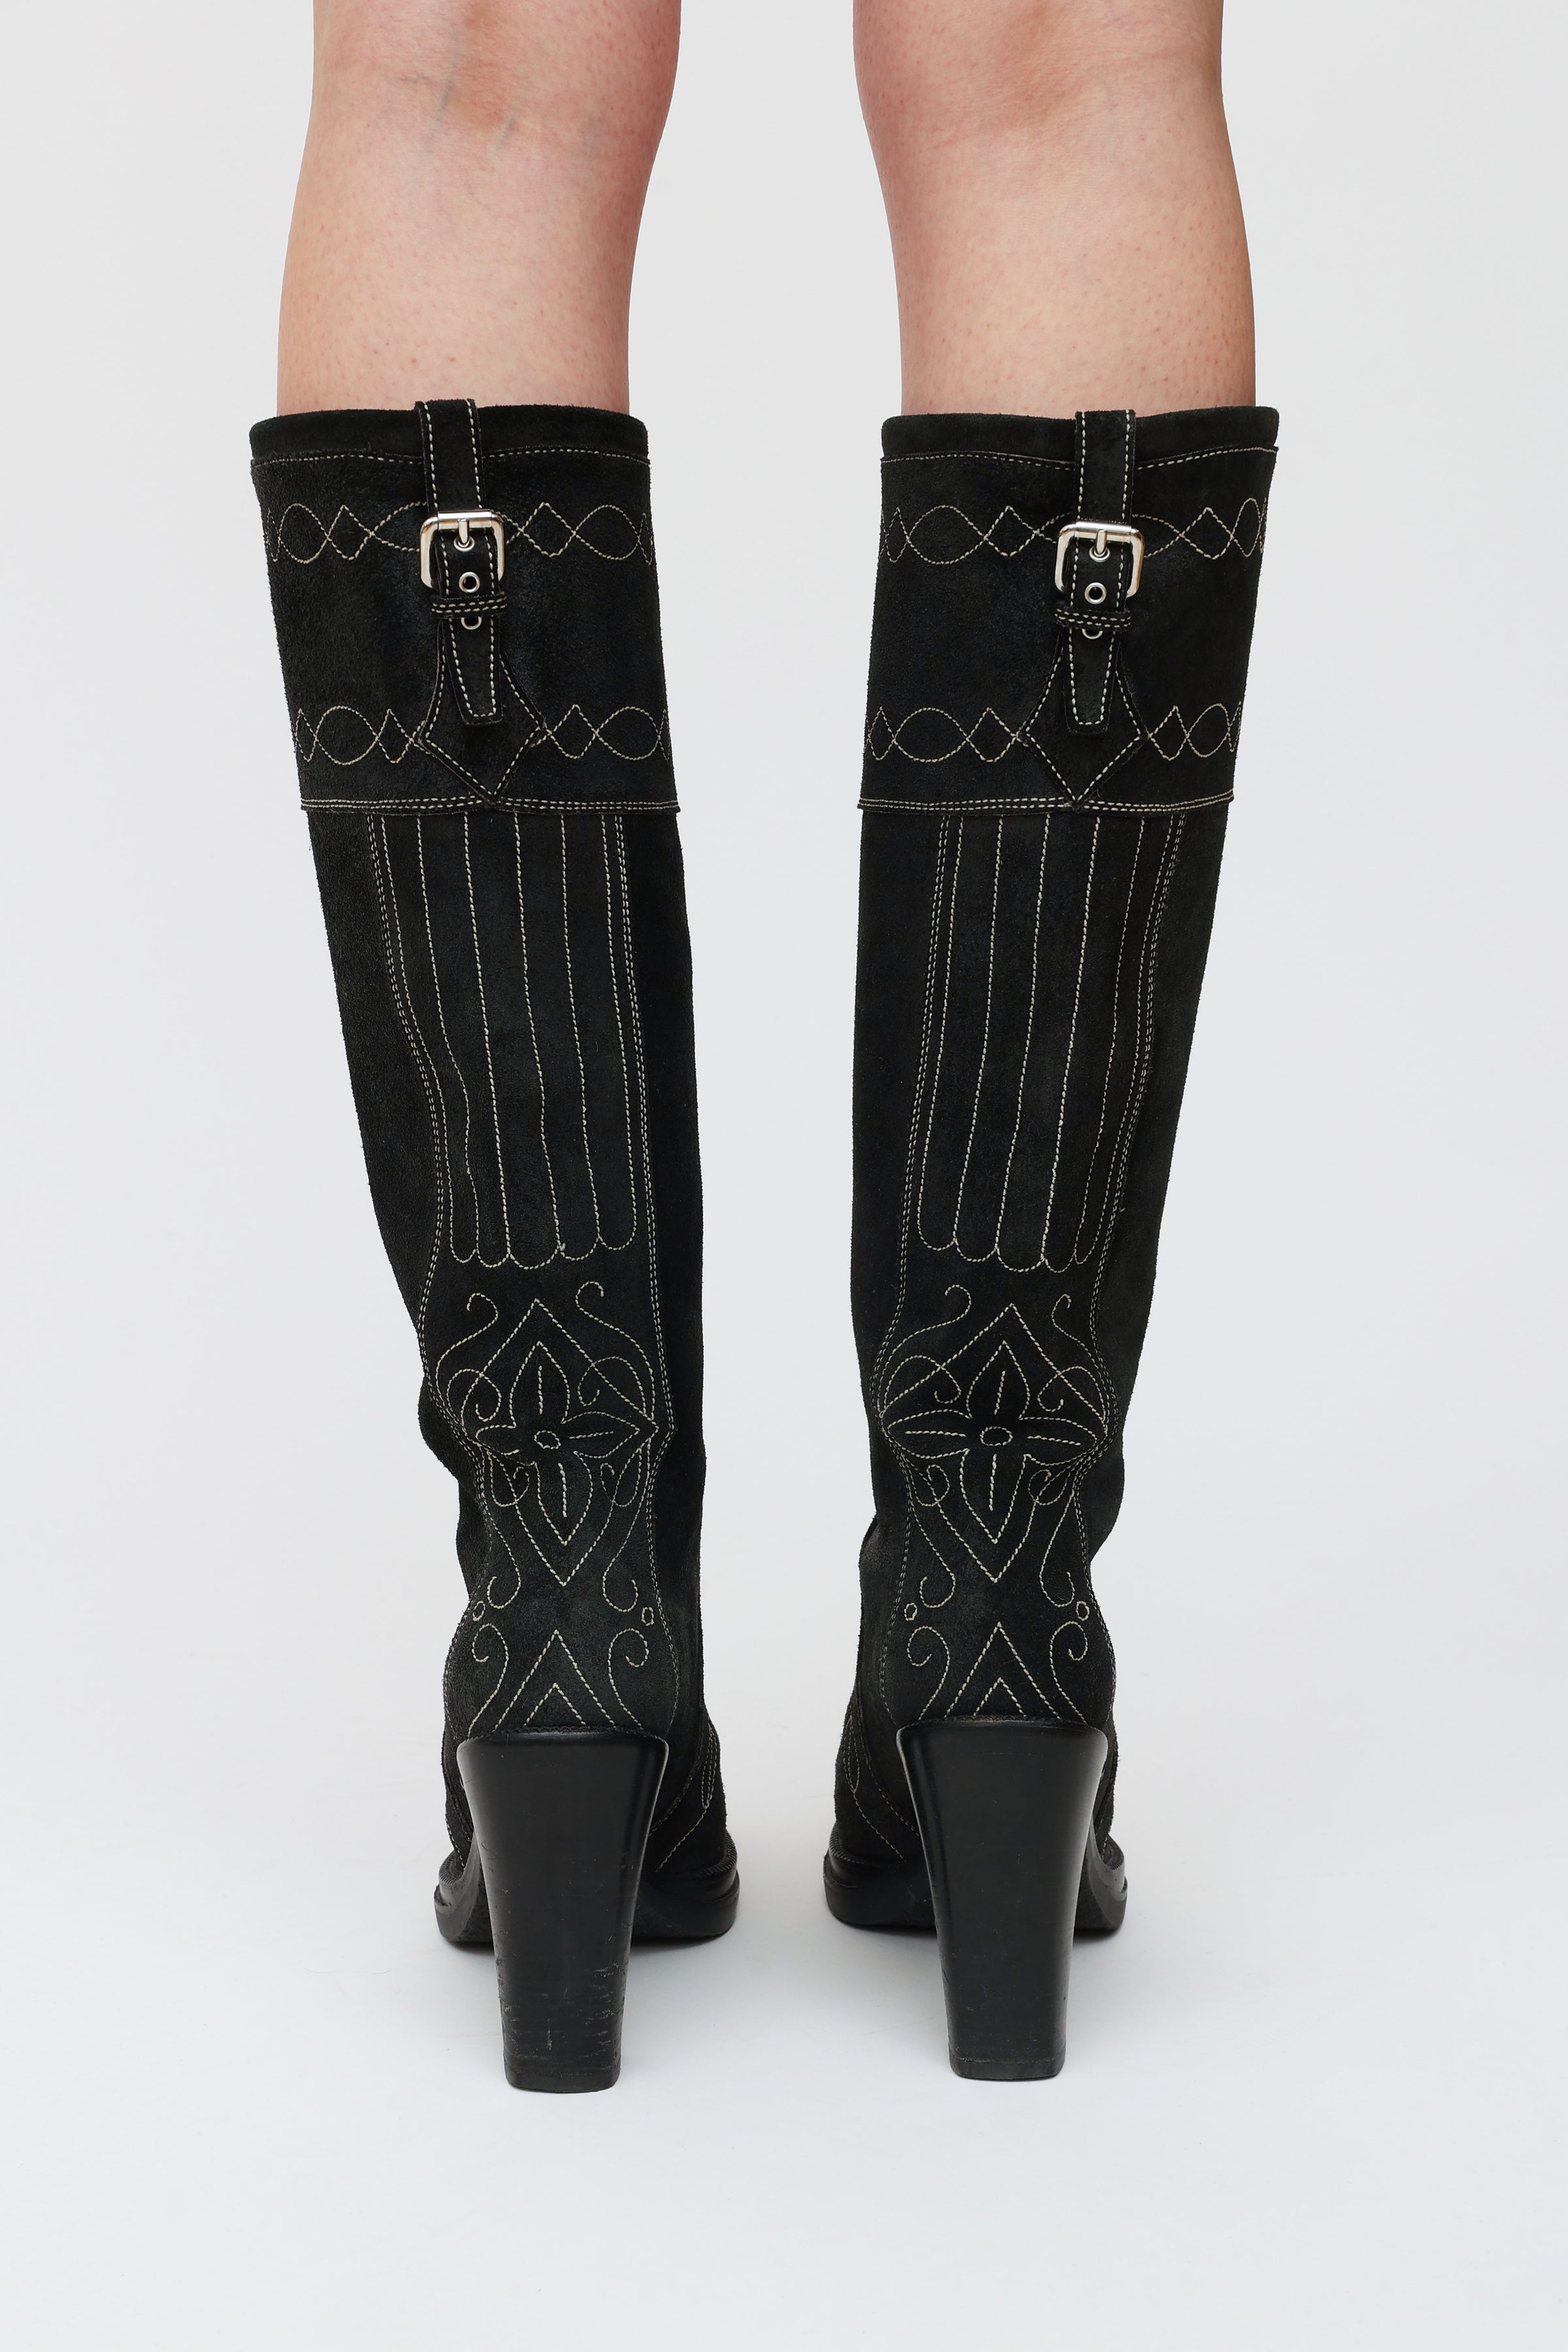 Authentic Second Hand Louis Vuitton Knee High Stiletto Boots  PSS68500010  THE FIFTH COLLECTION